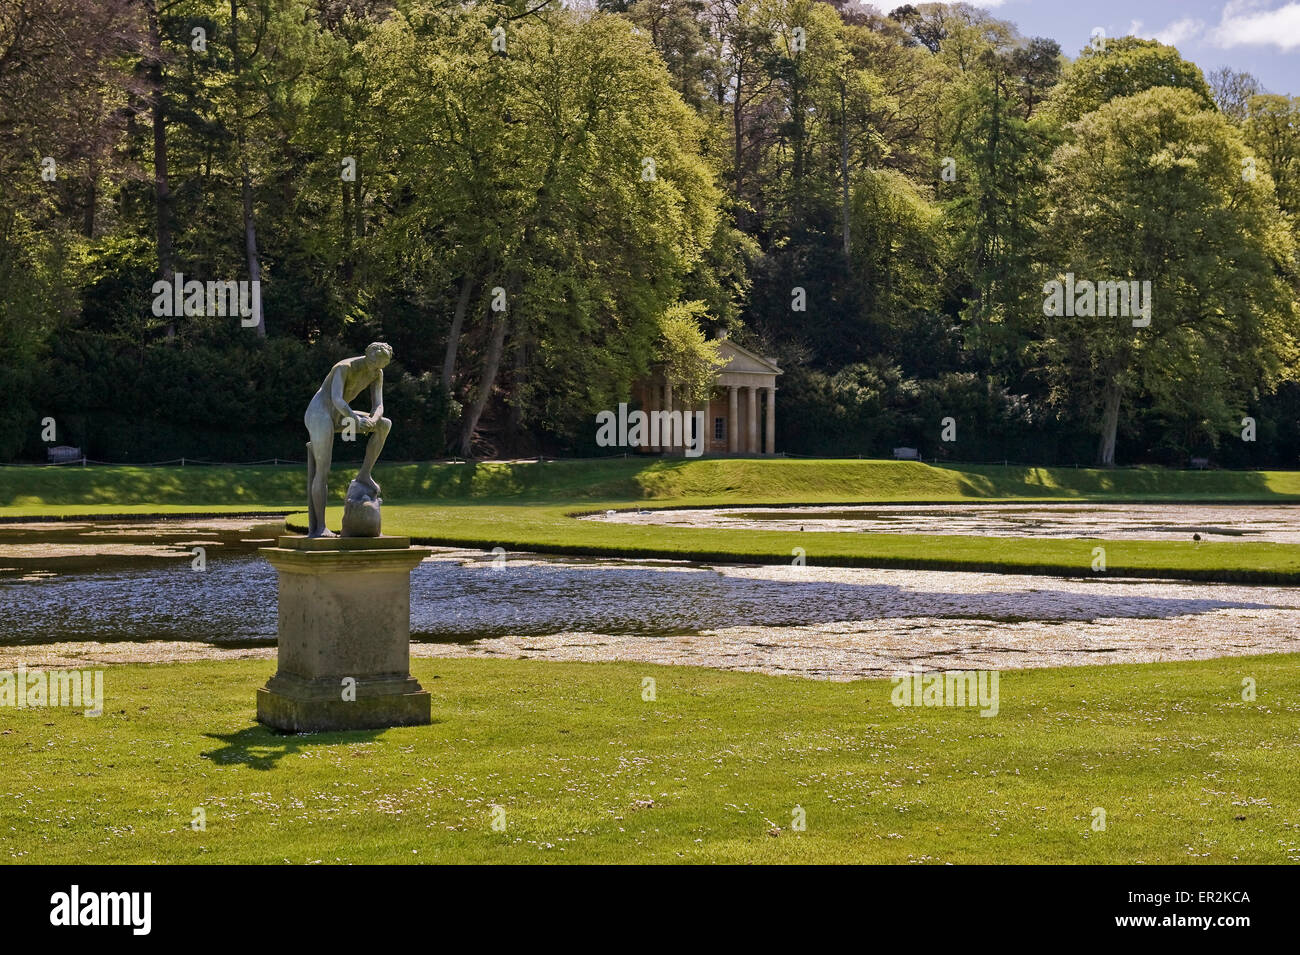 Statue and Temple of Piety, Studley Royal landscape gardens, near Ripon, North Yorkshire, England, UK Europe Stock Photo